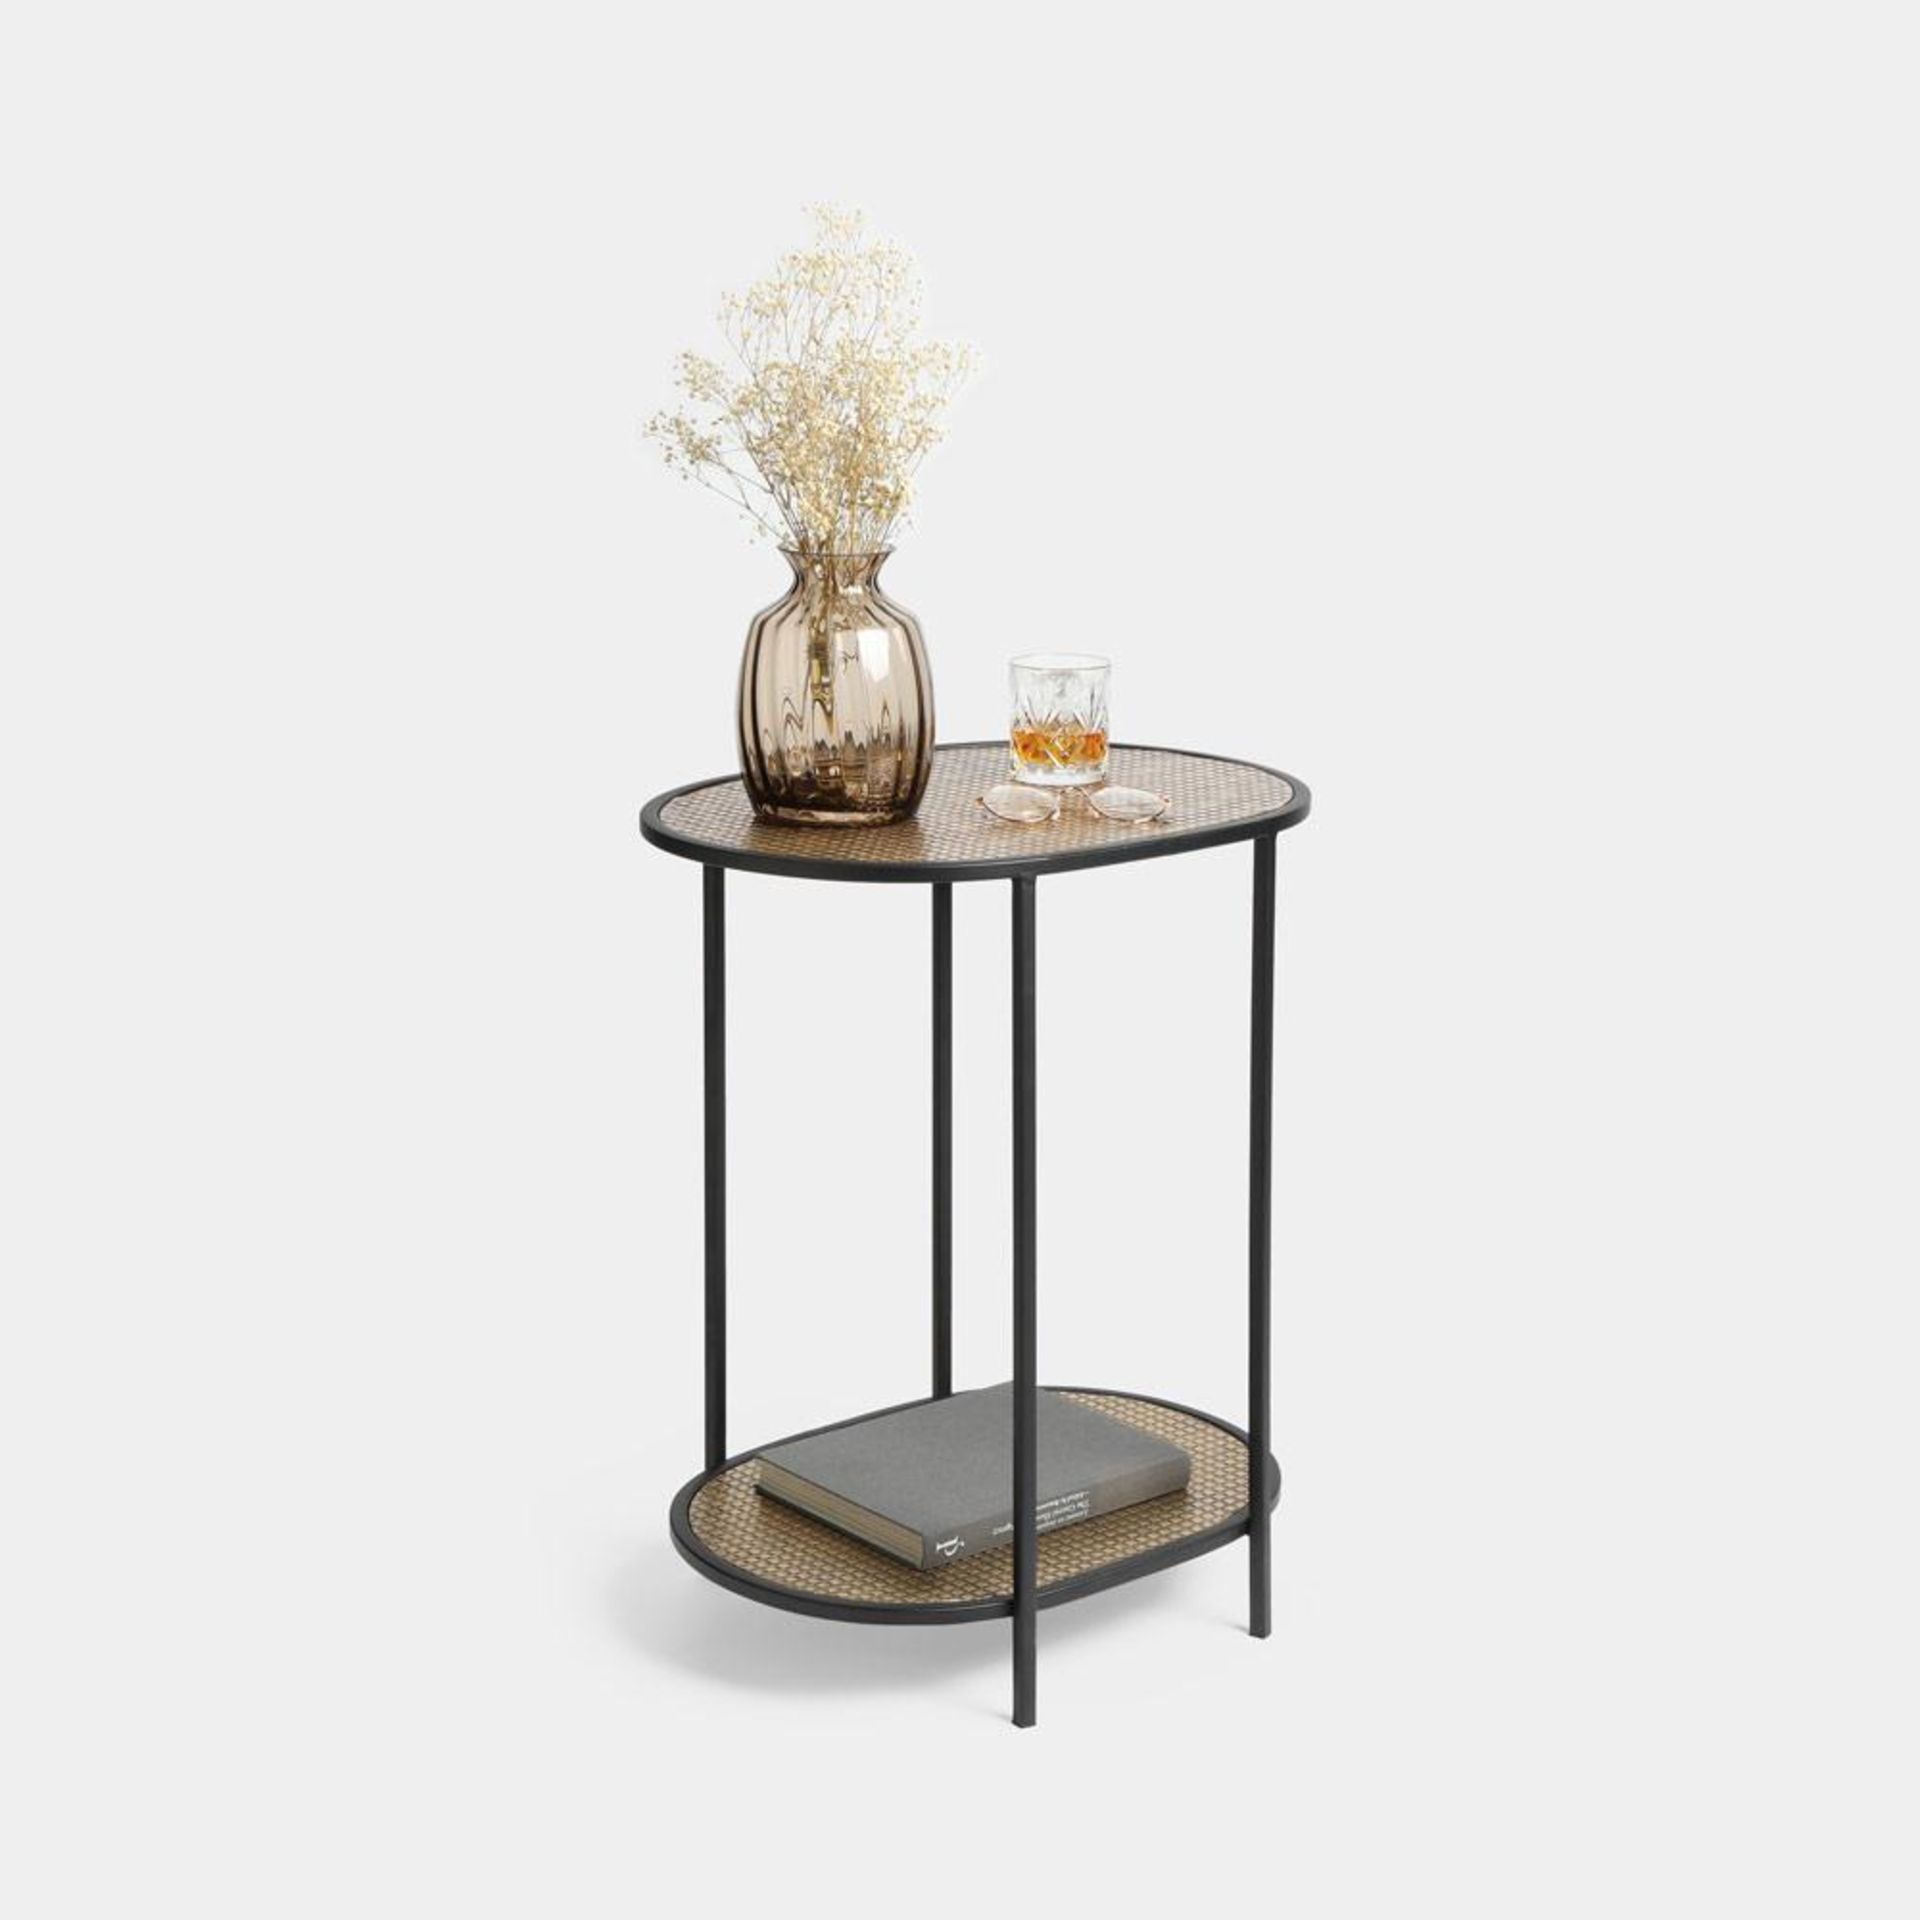 (9/464)Oval Brass Finish Side Table - S2. Oval Brass Finish Side TableWelcome to Spinningfield,